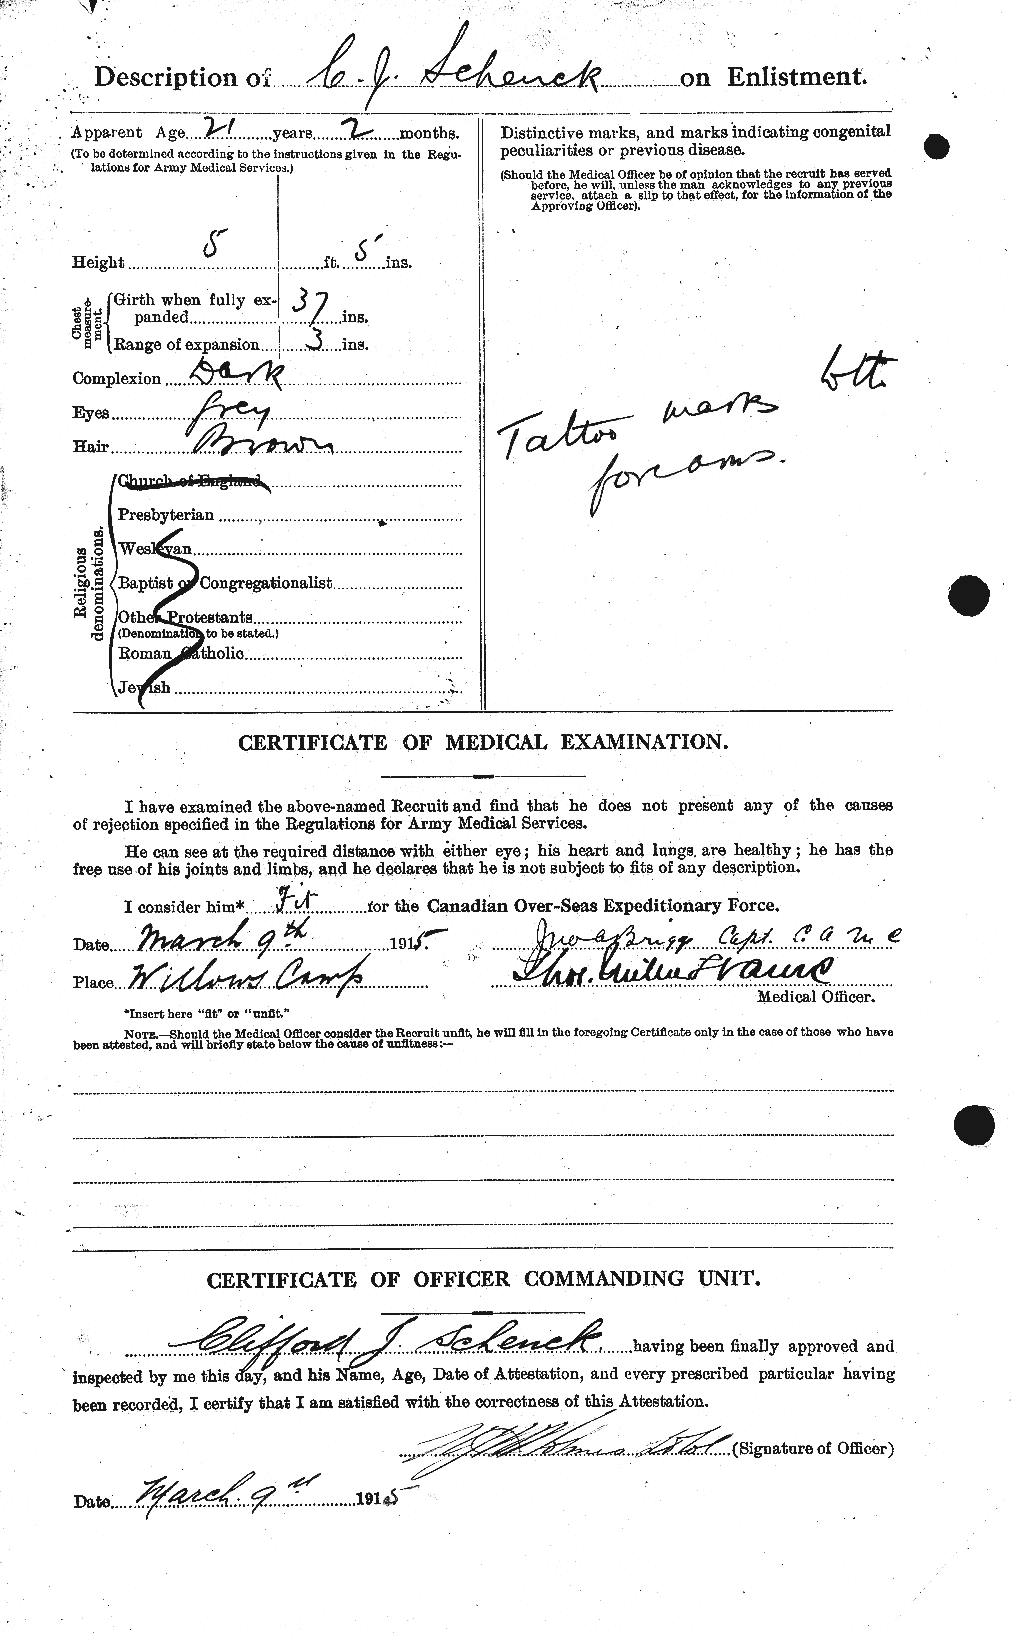 Personnel Records of the First World War - CEF 079948b